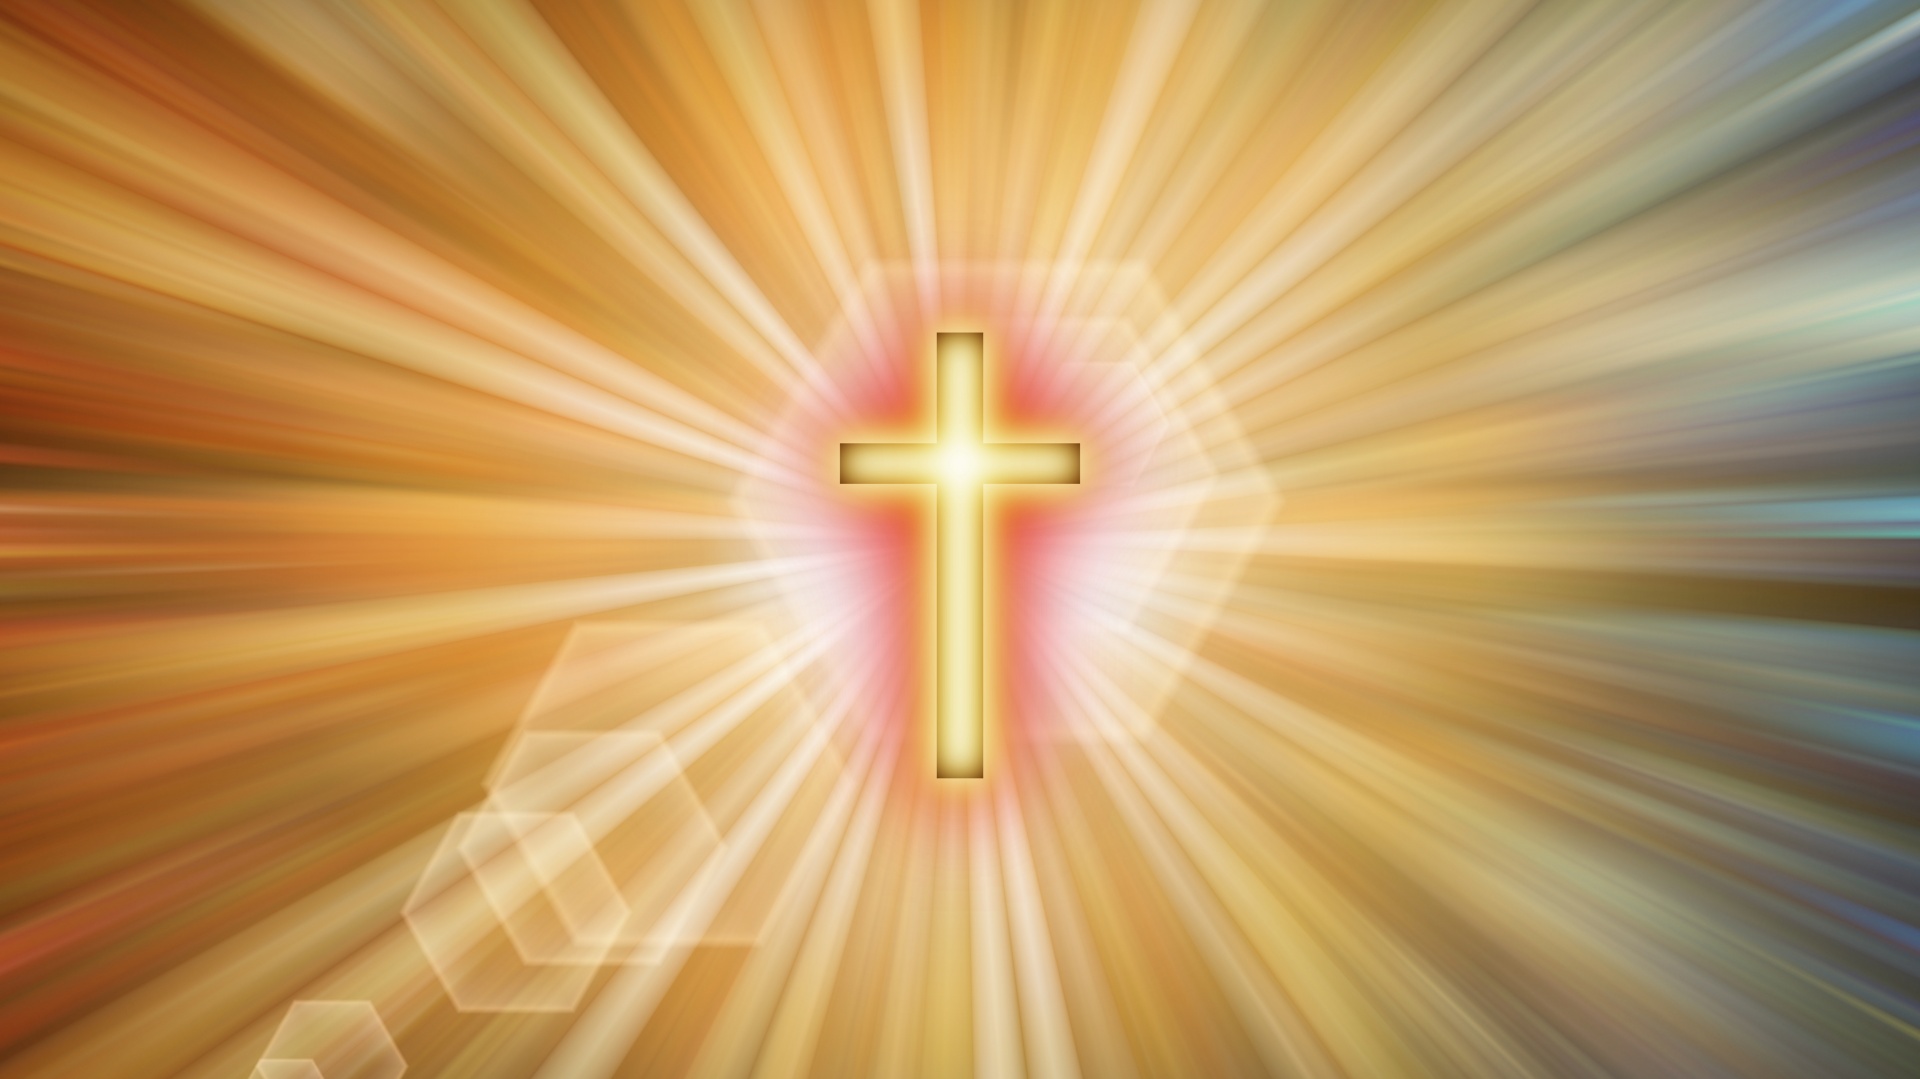 A glowing cross on a radial blur background with a distant sun gradient flare.